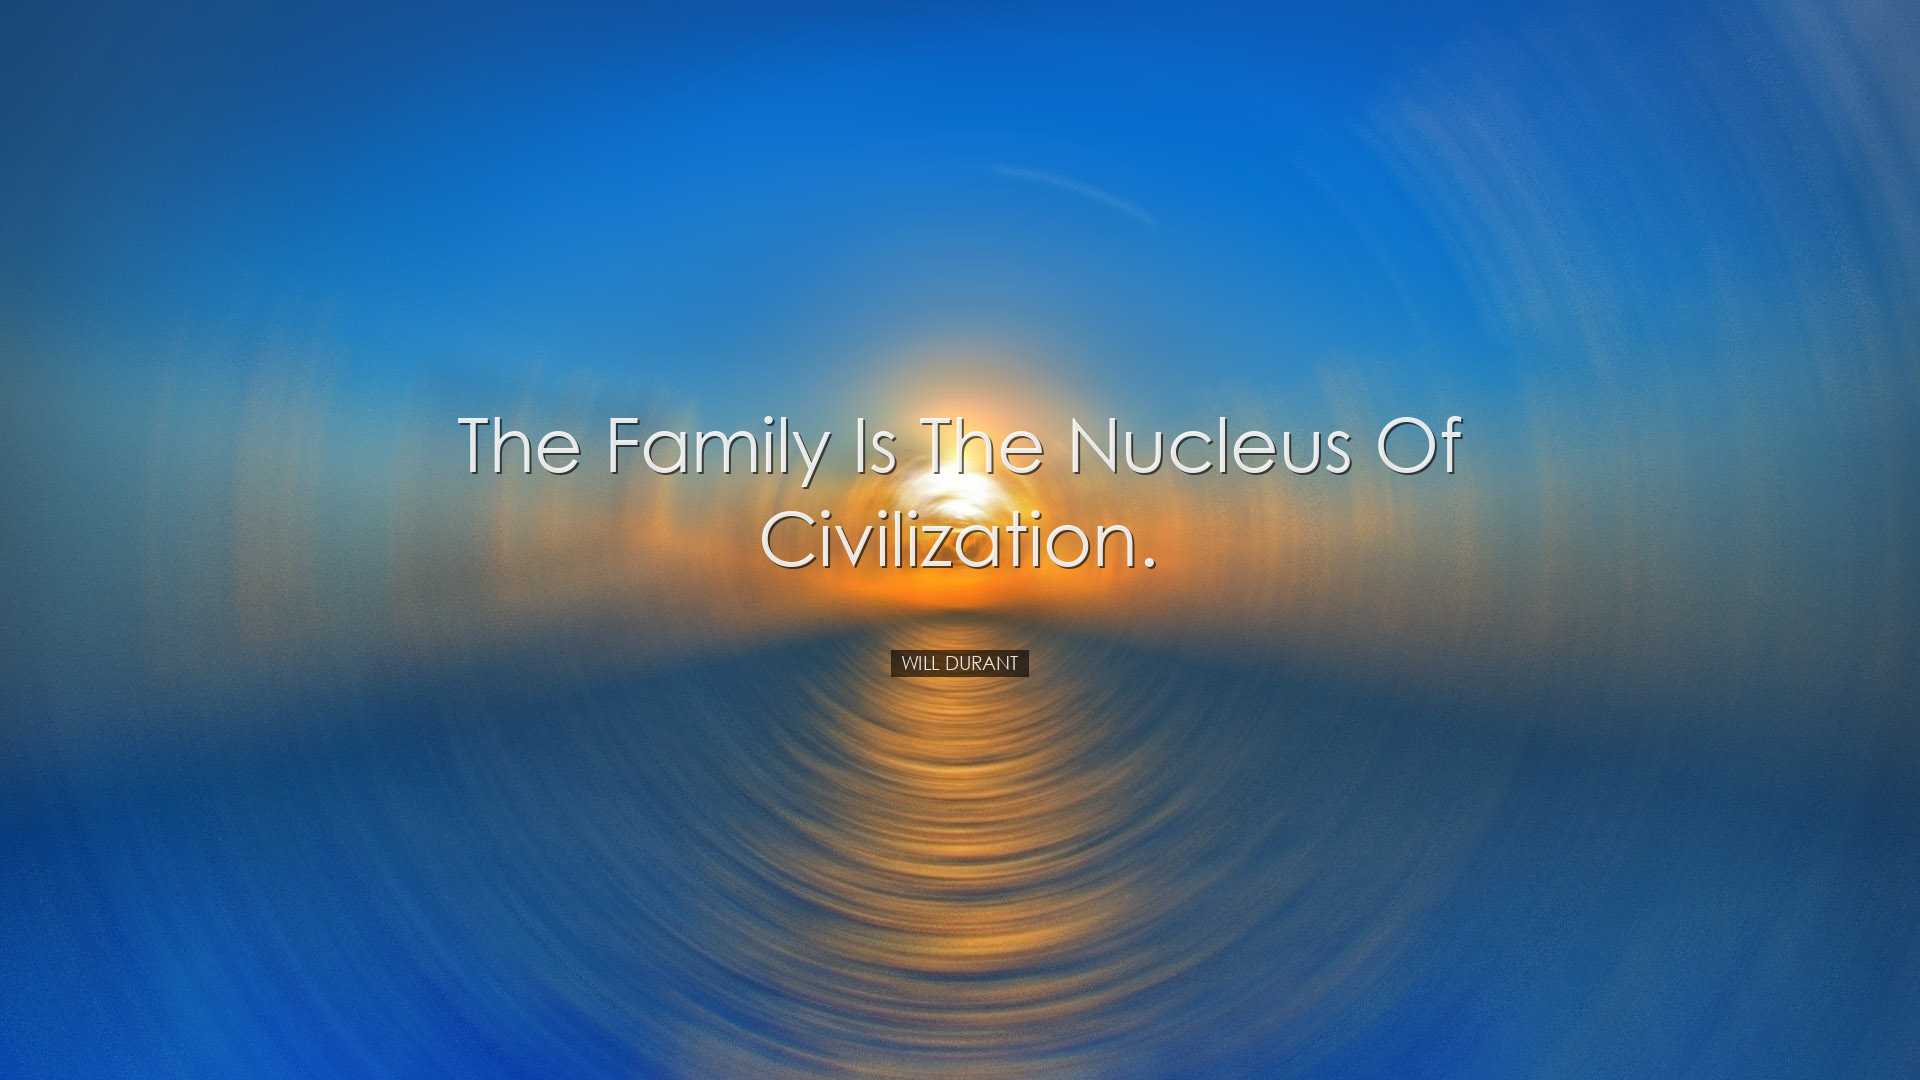 The family is the nucleus of civilization. - Will Durant